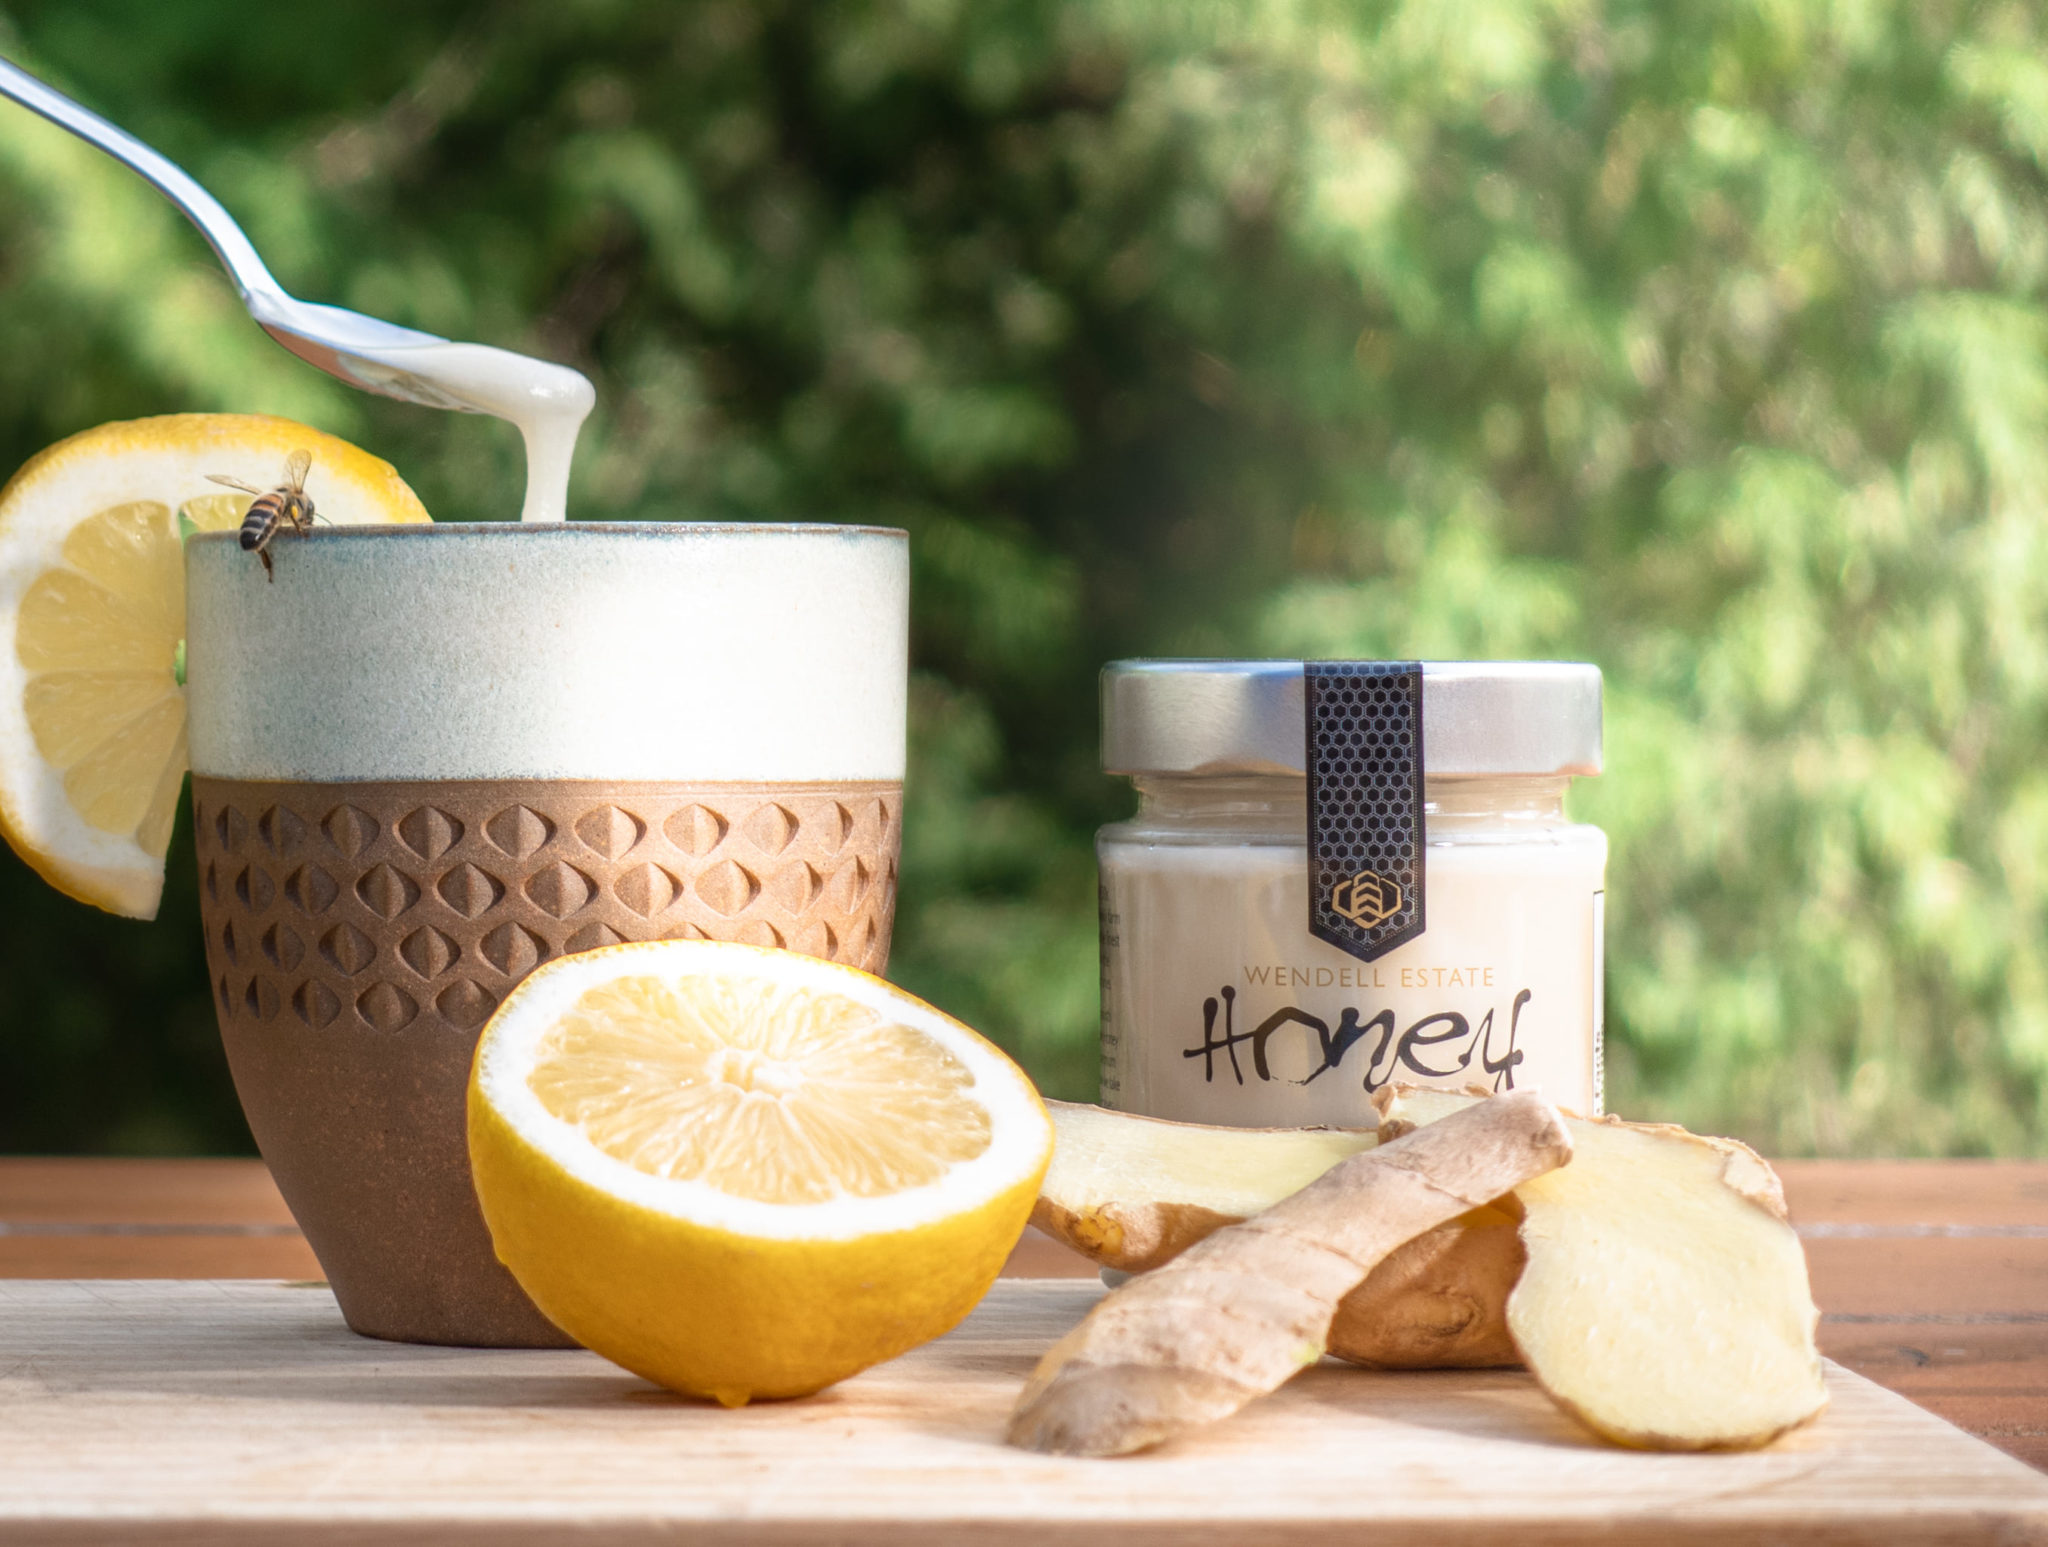 Healthy fresh Wendell Estate Honey goes great with tea